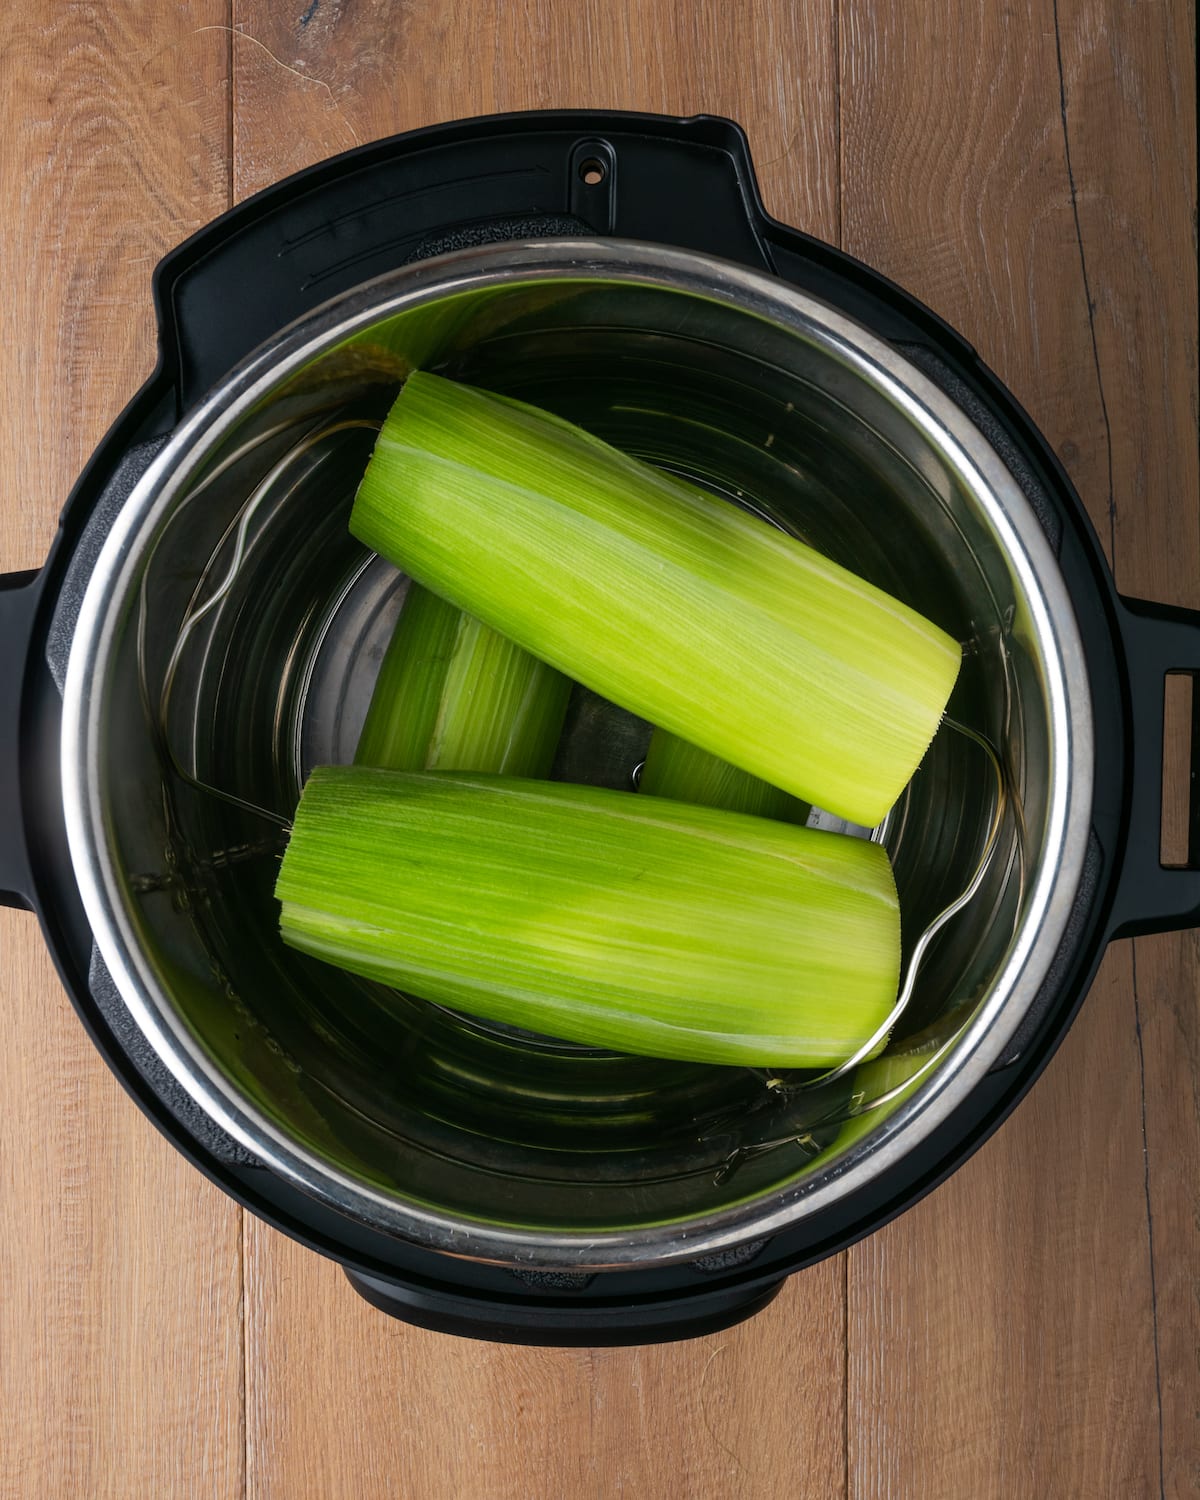 Top view of ears of corn with husks inside an Instant Pot.